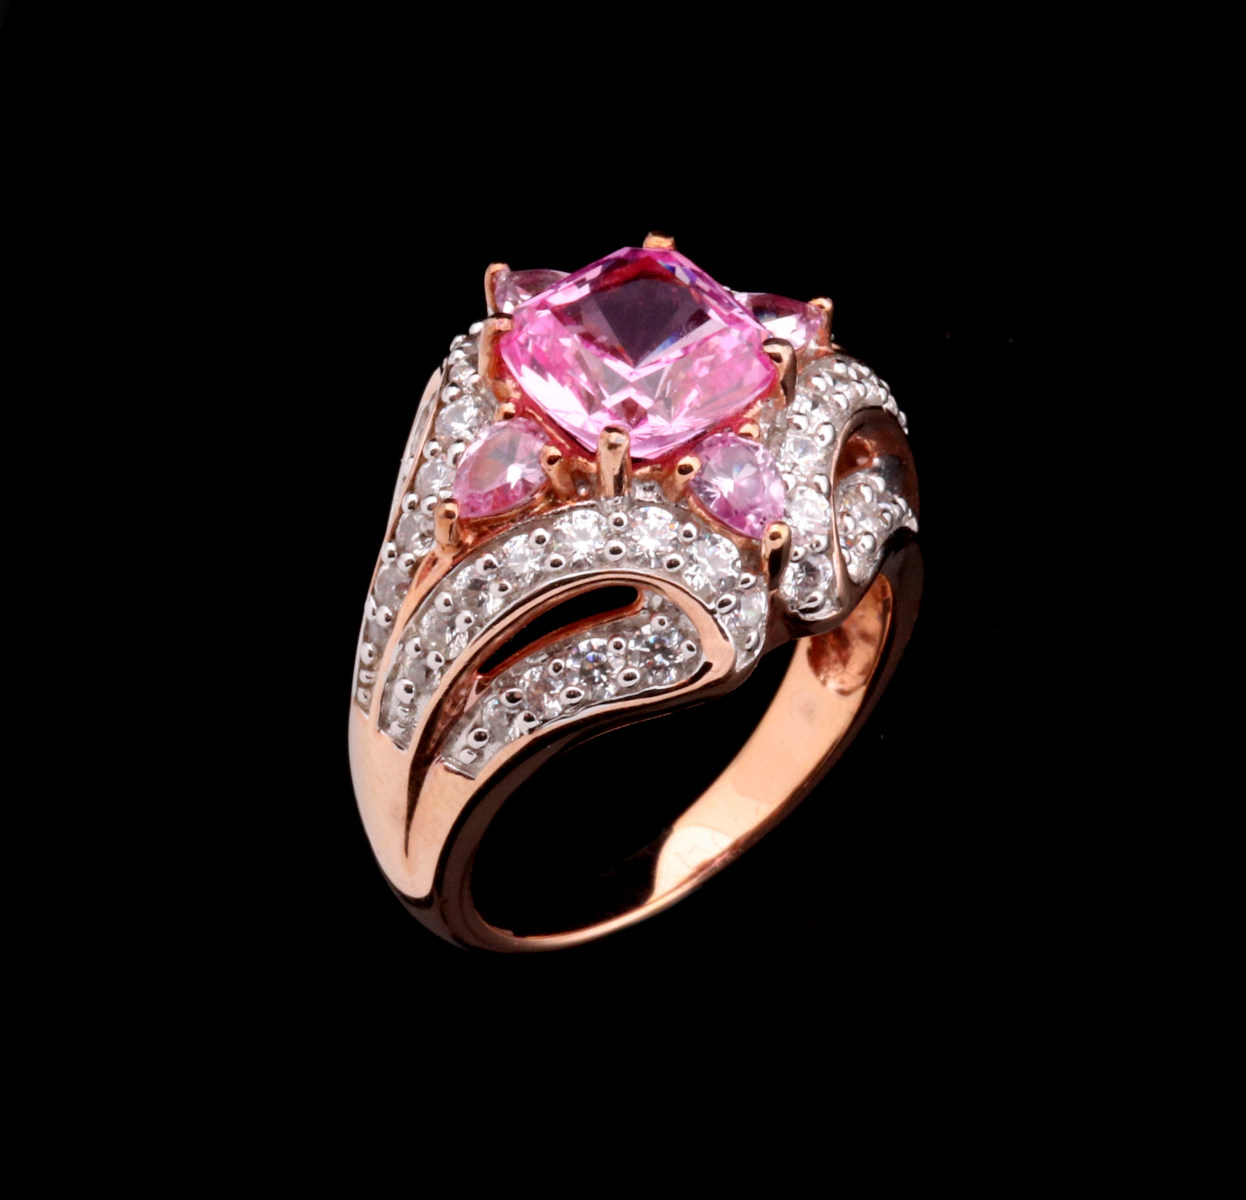 A LADIES' VERMEIL COCKTAIL RING WITH PINK SAPPHIRE